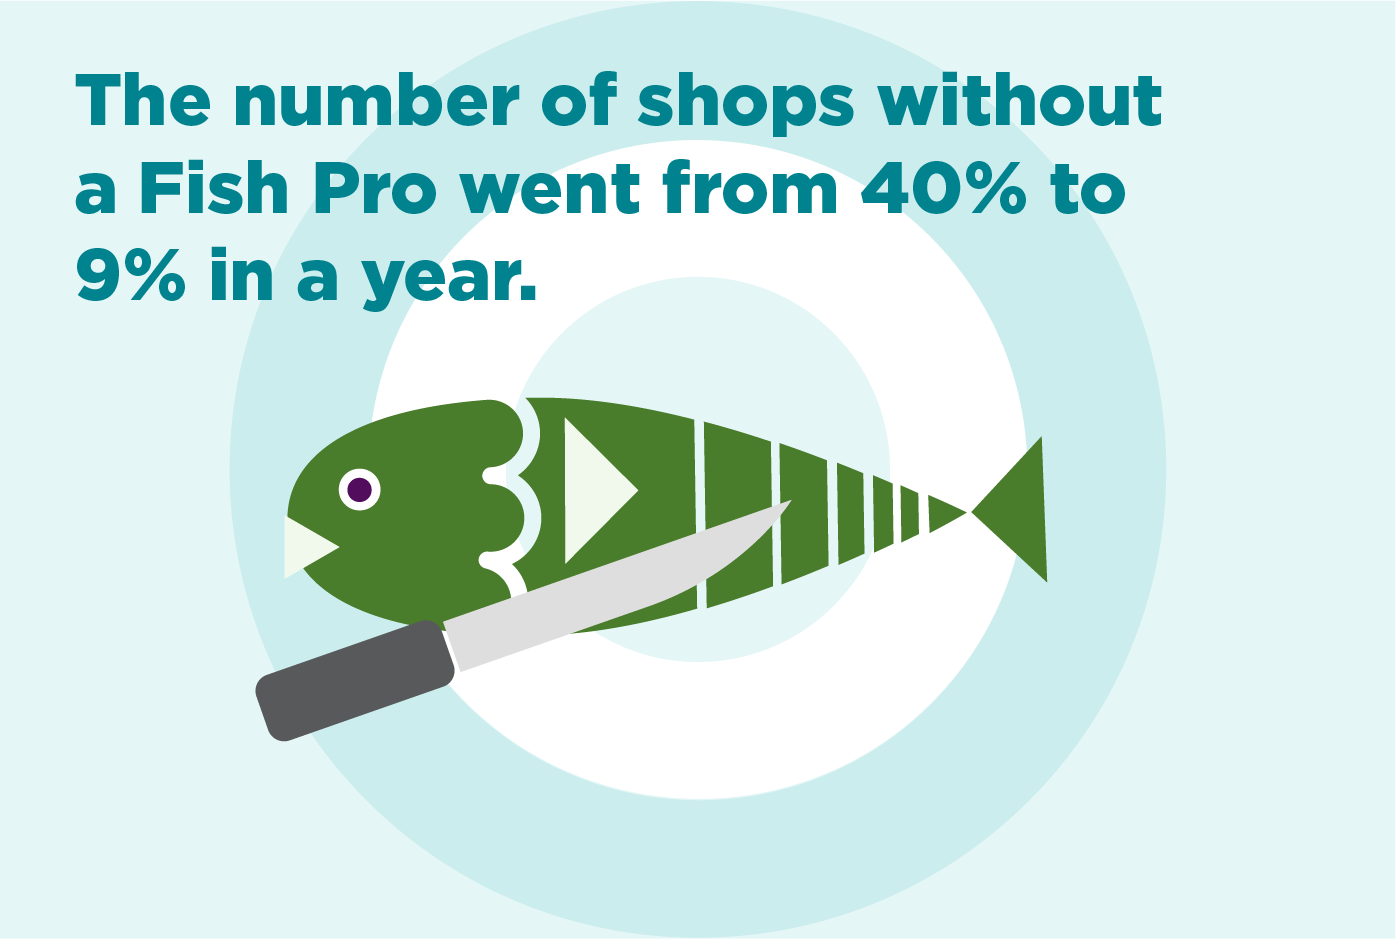 The number of shops without a Fish Pro went from 40% to 9% in a year.